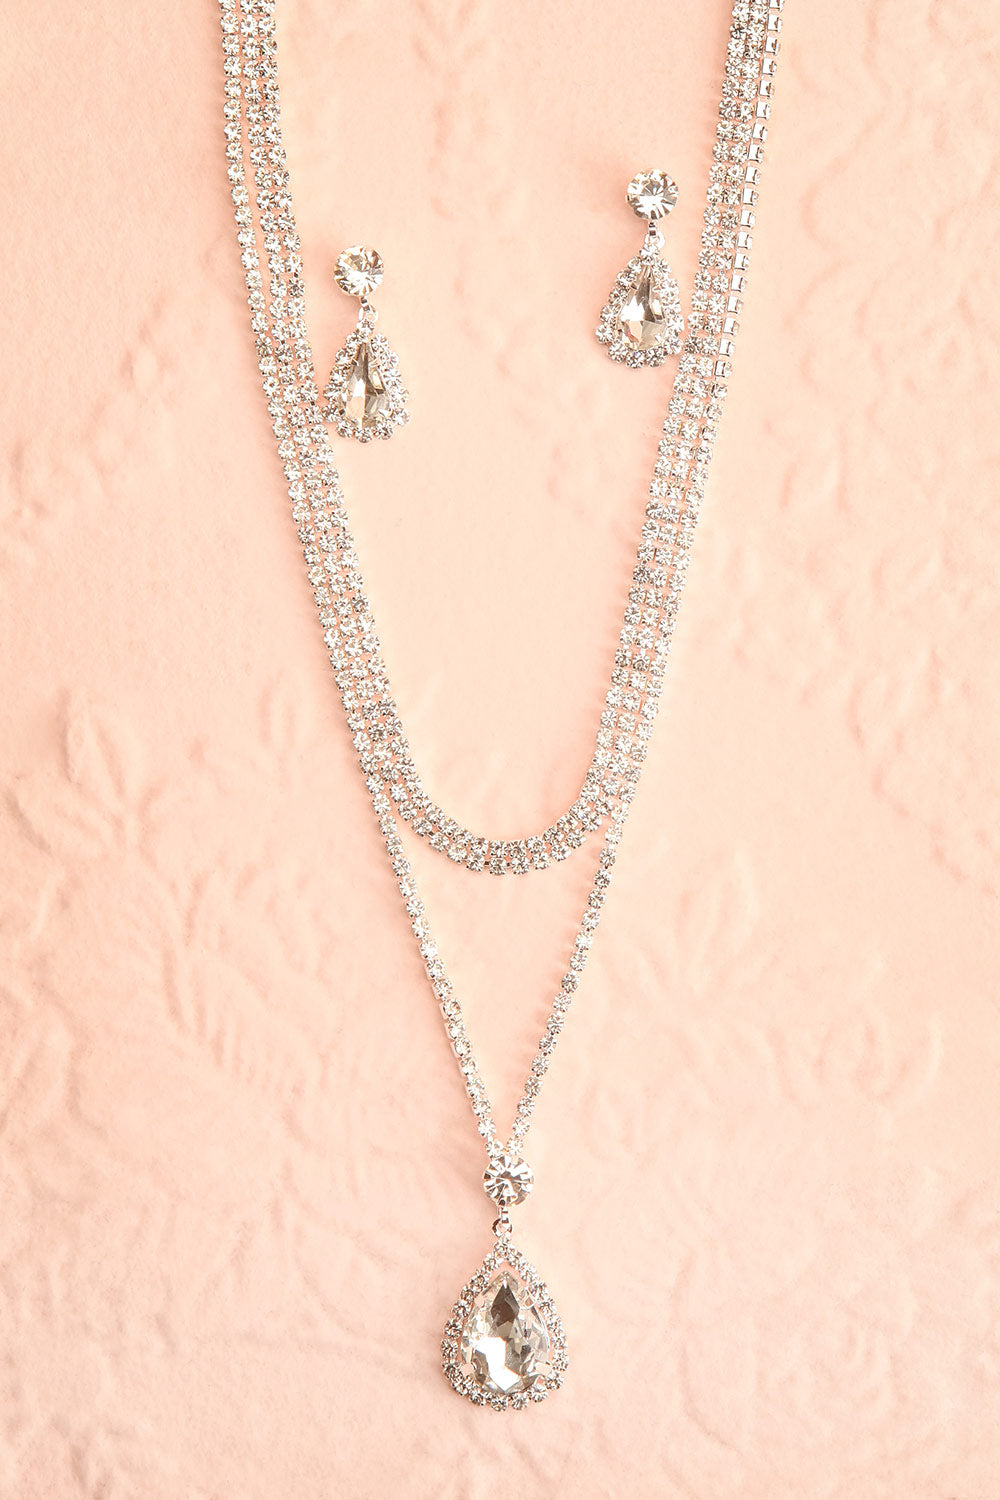 Cheremkovo Crystal Earrings & Matching Necklaces Set | Boutique 1861 flat 